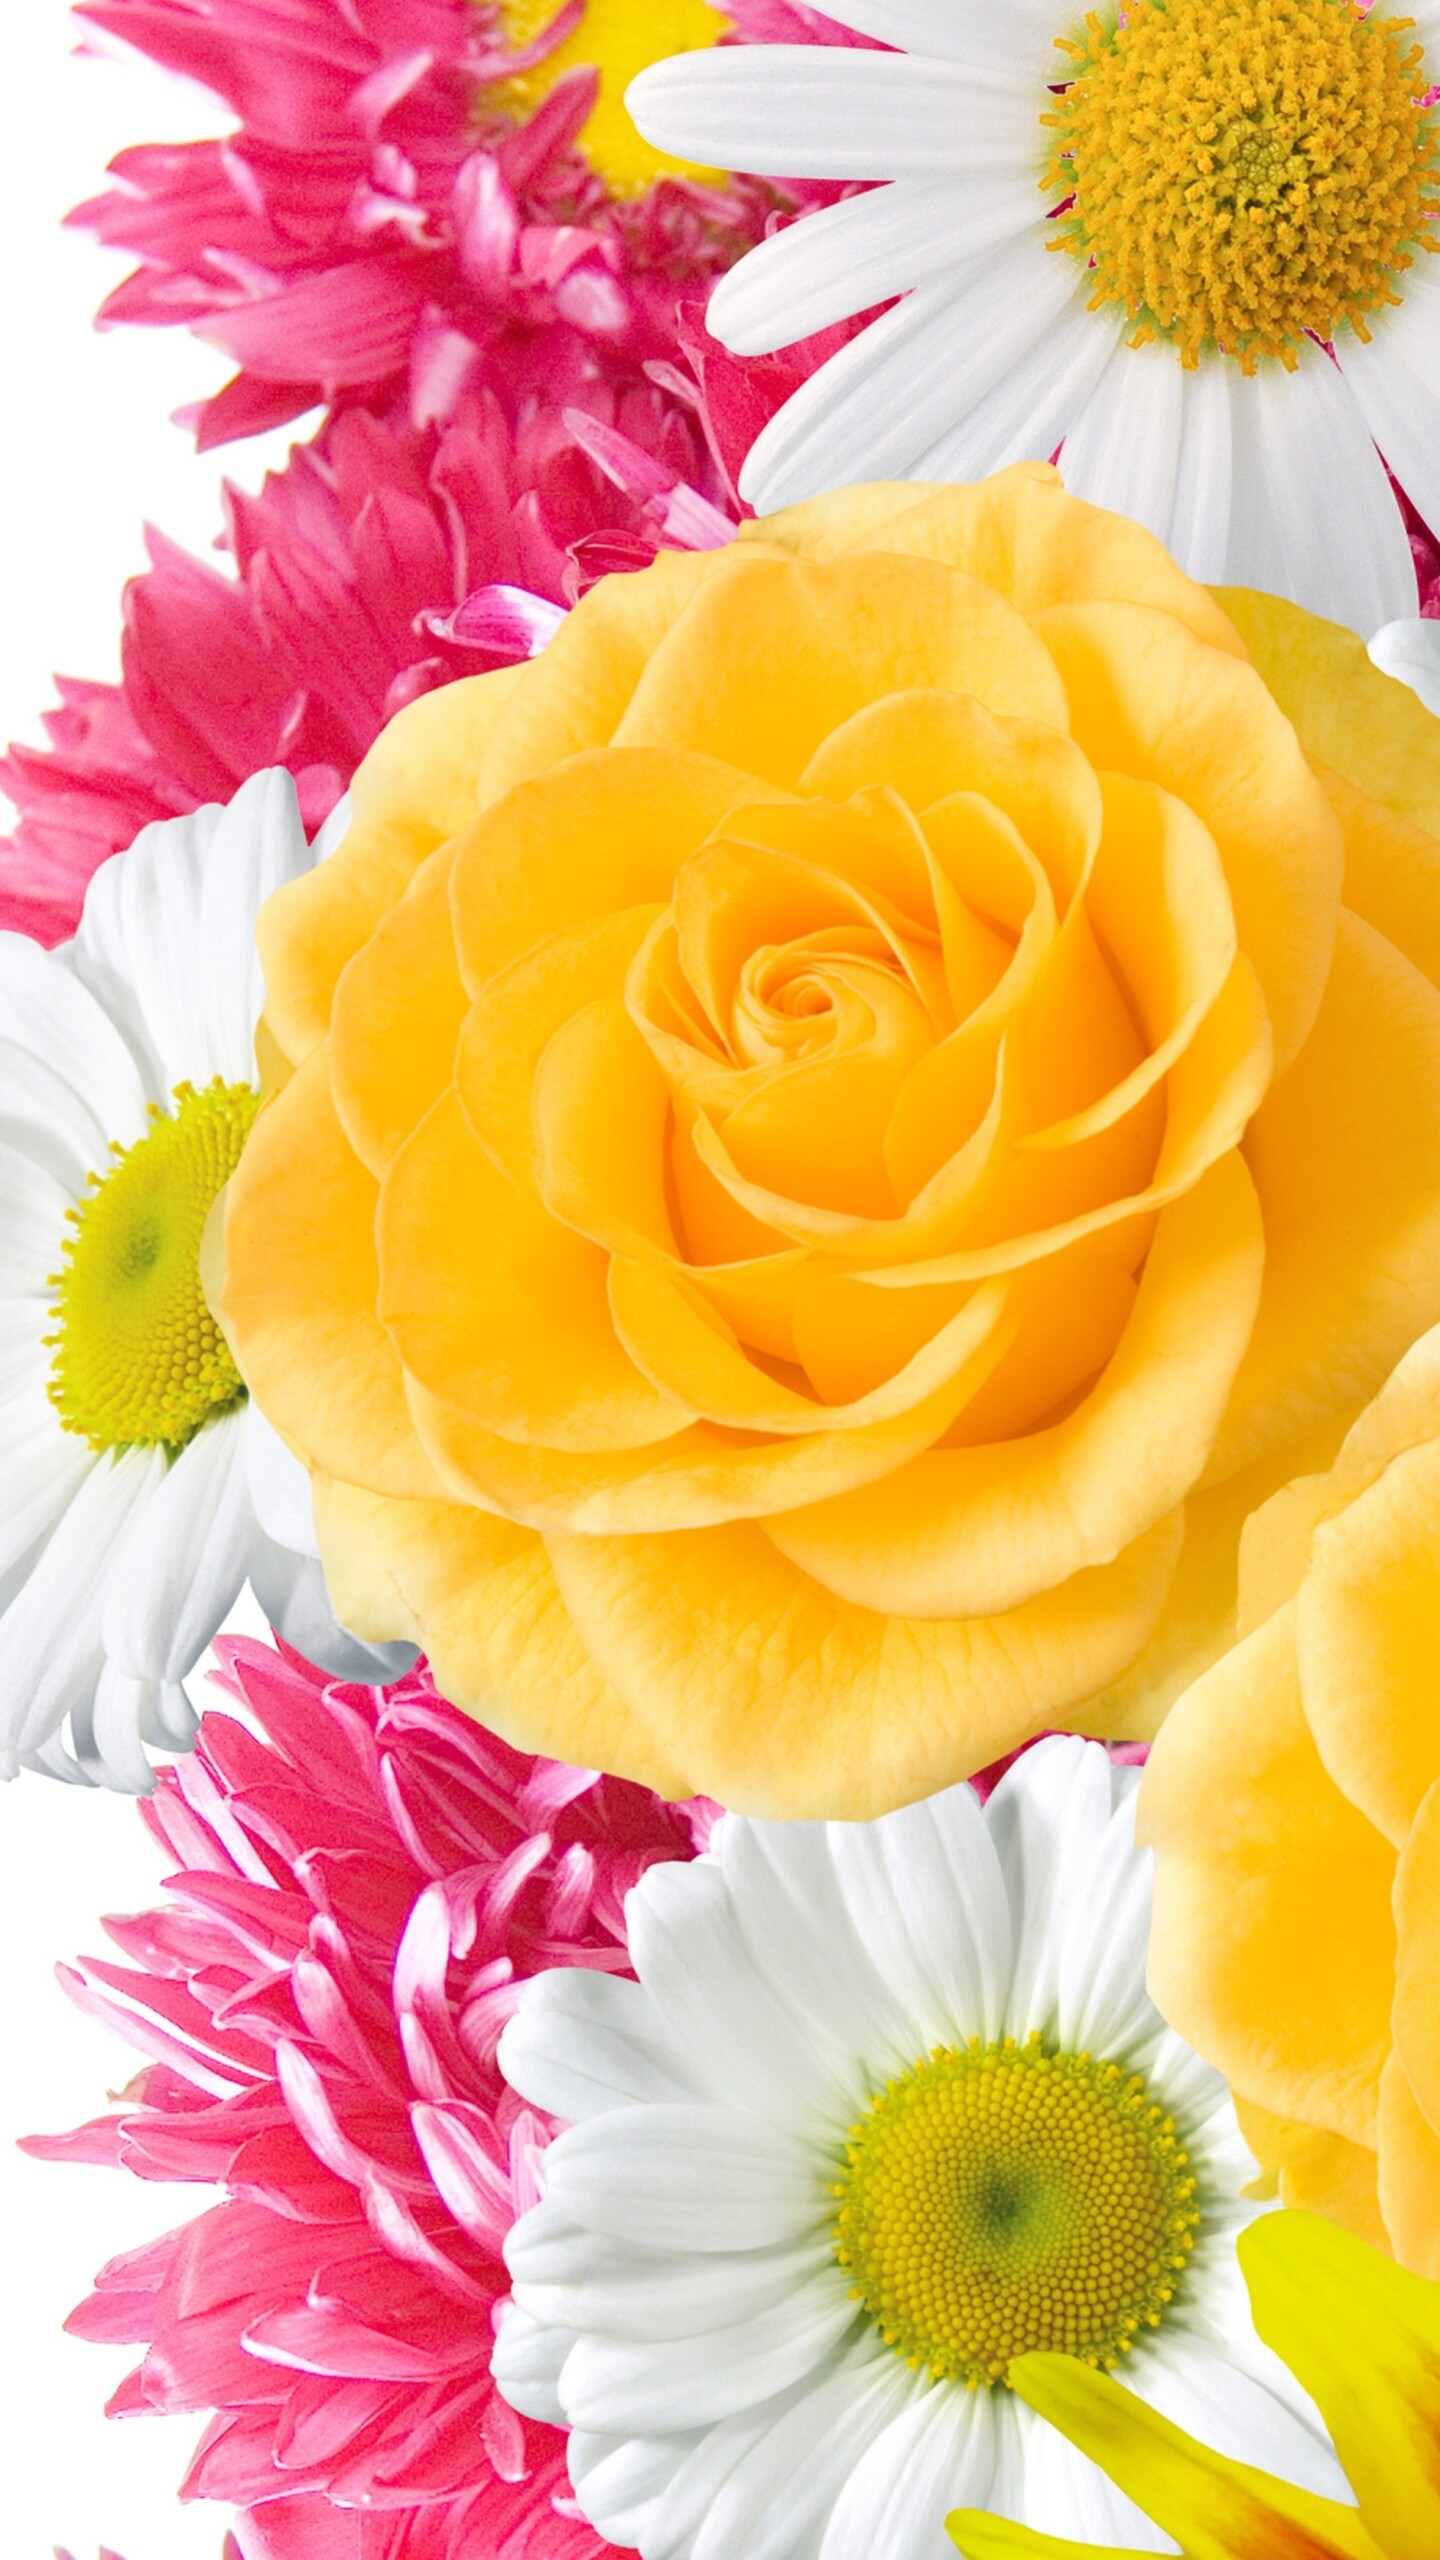 Flower Bouquet: A group of flowers that have been fastened together and attractively arranged so that they can be given as a present or carried on formal occasions. 1440x2560 HD Wallpaper.